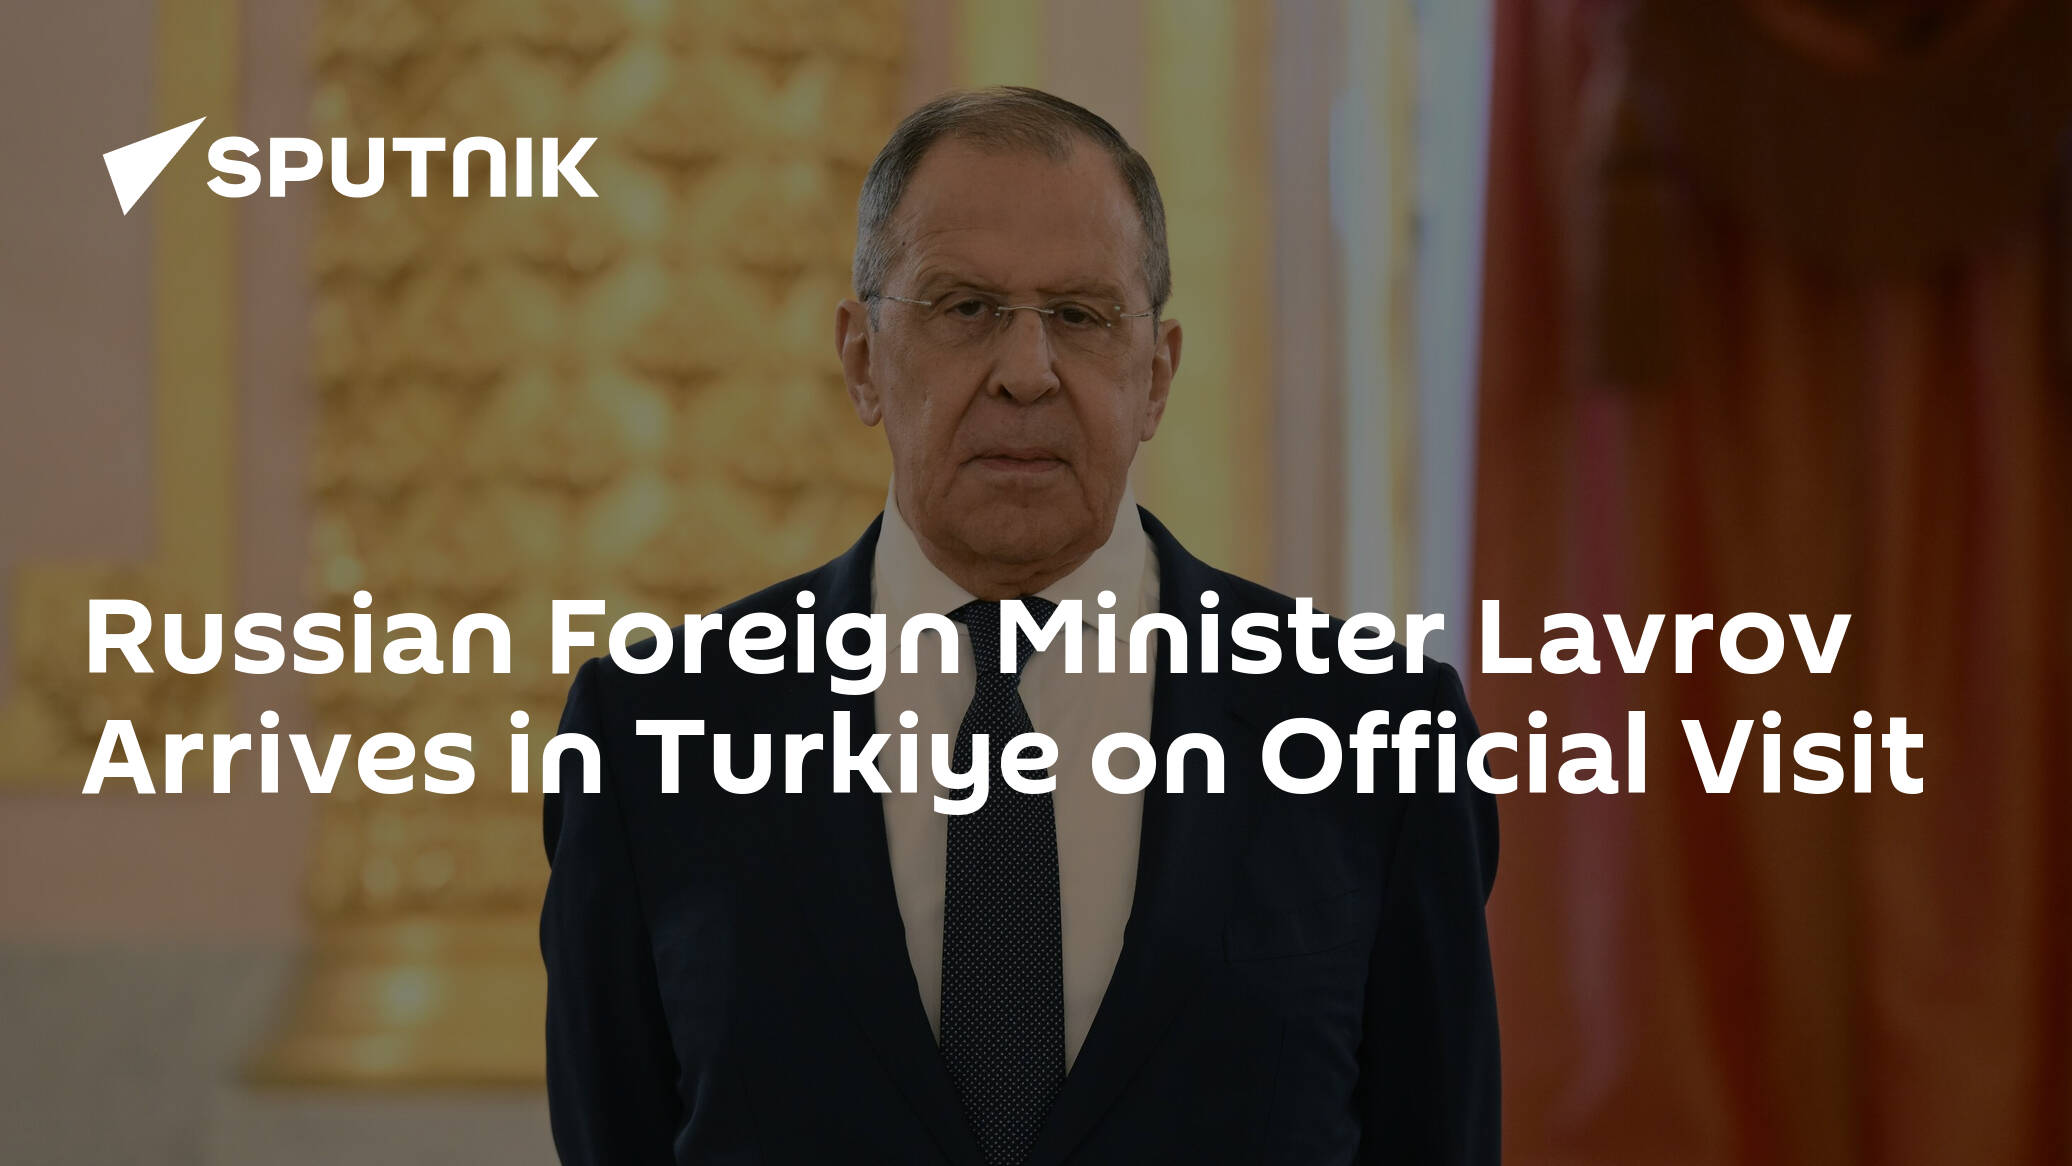 Russian Foreign Minister Lavrov Arrives in Turkiye on Official Visit